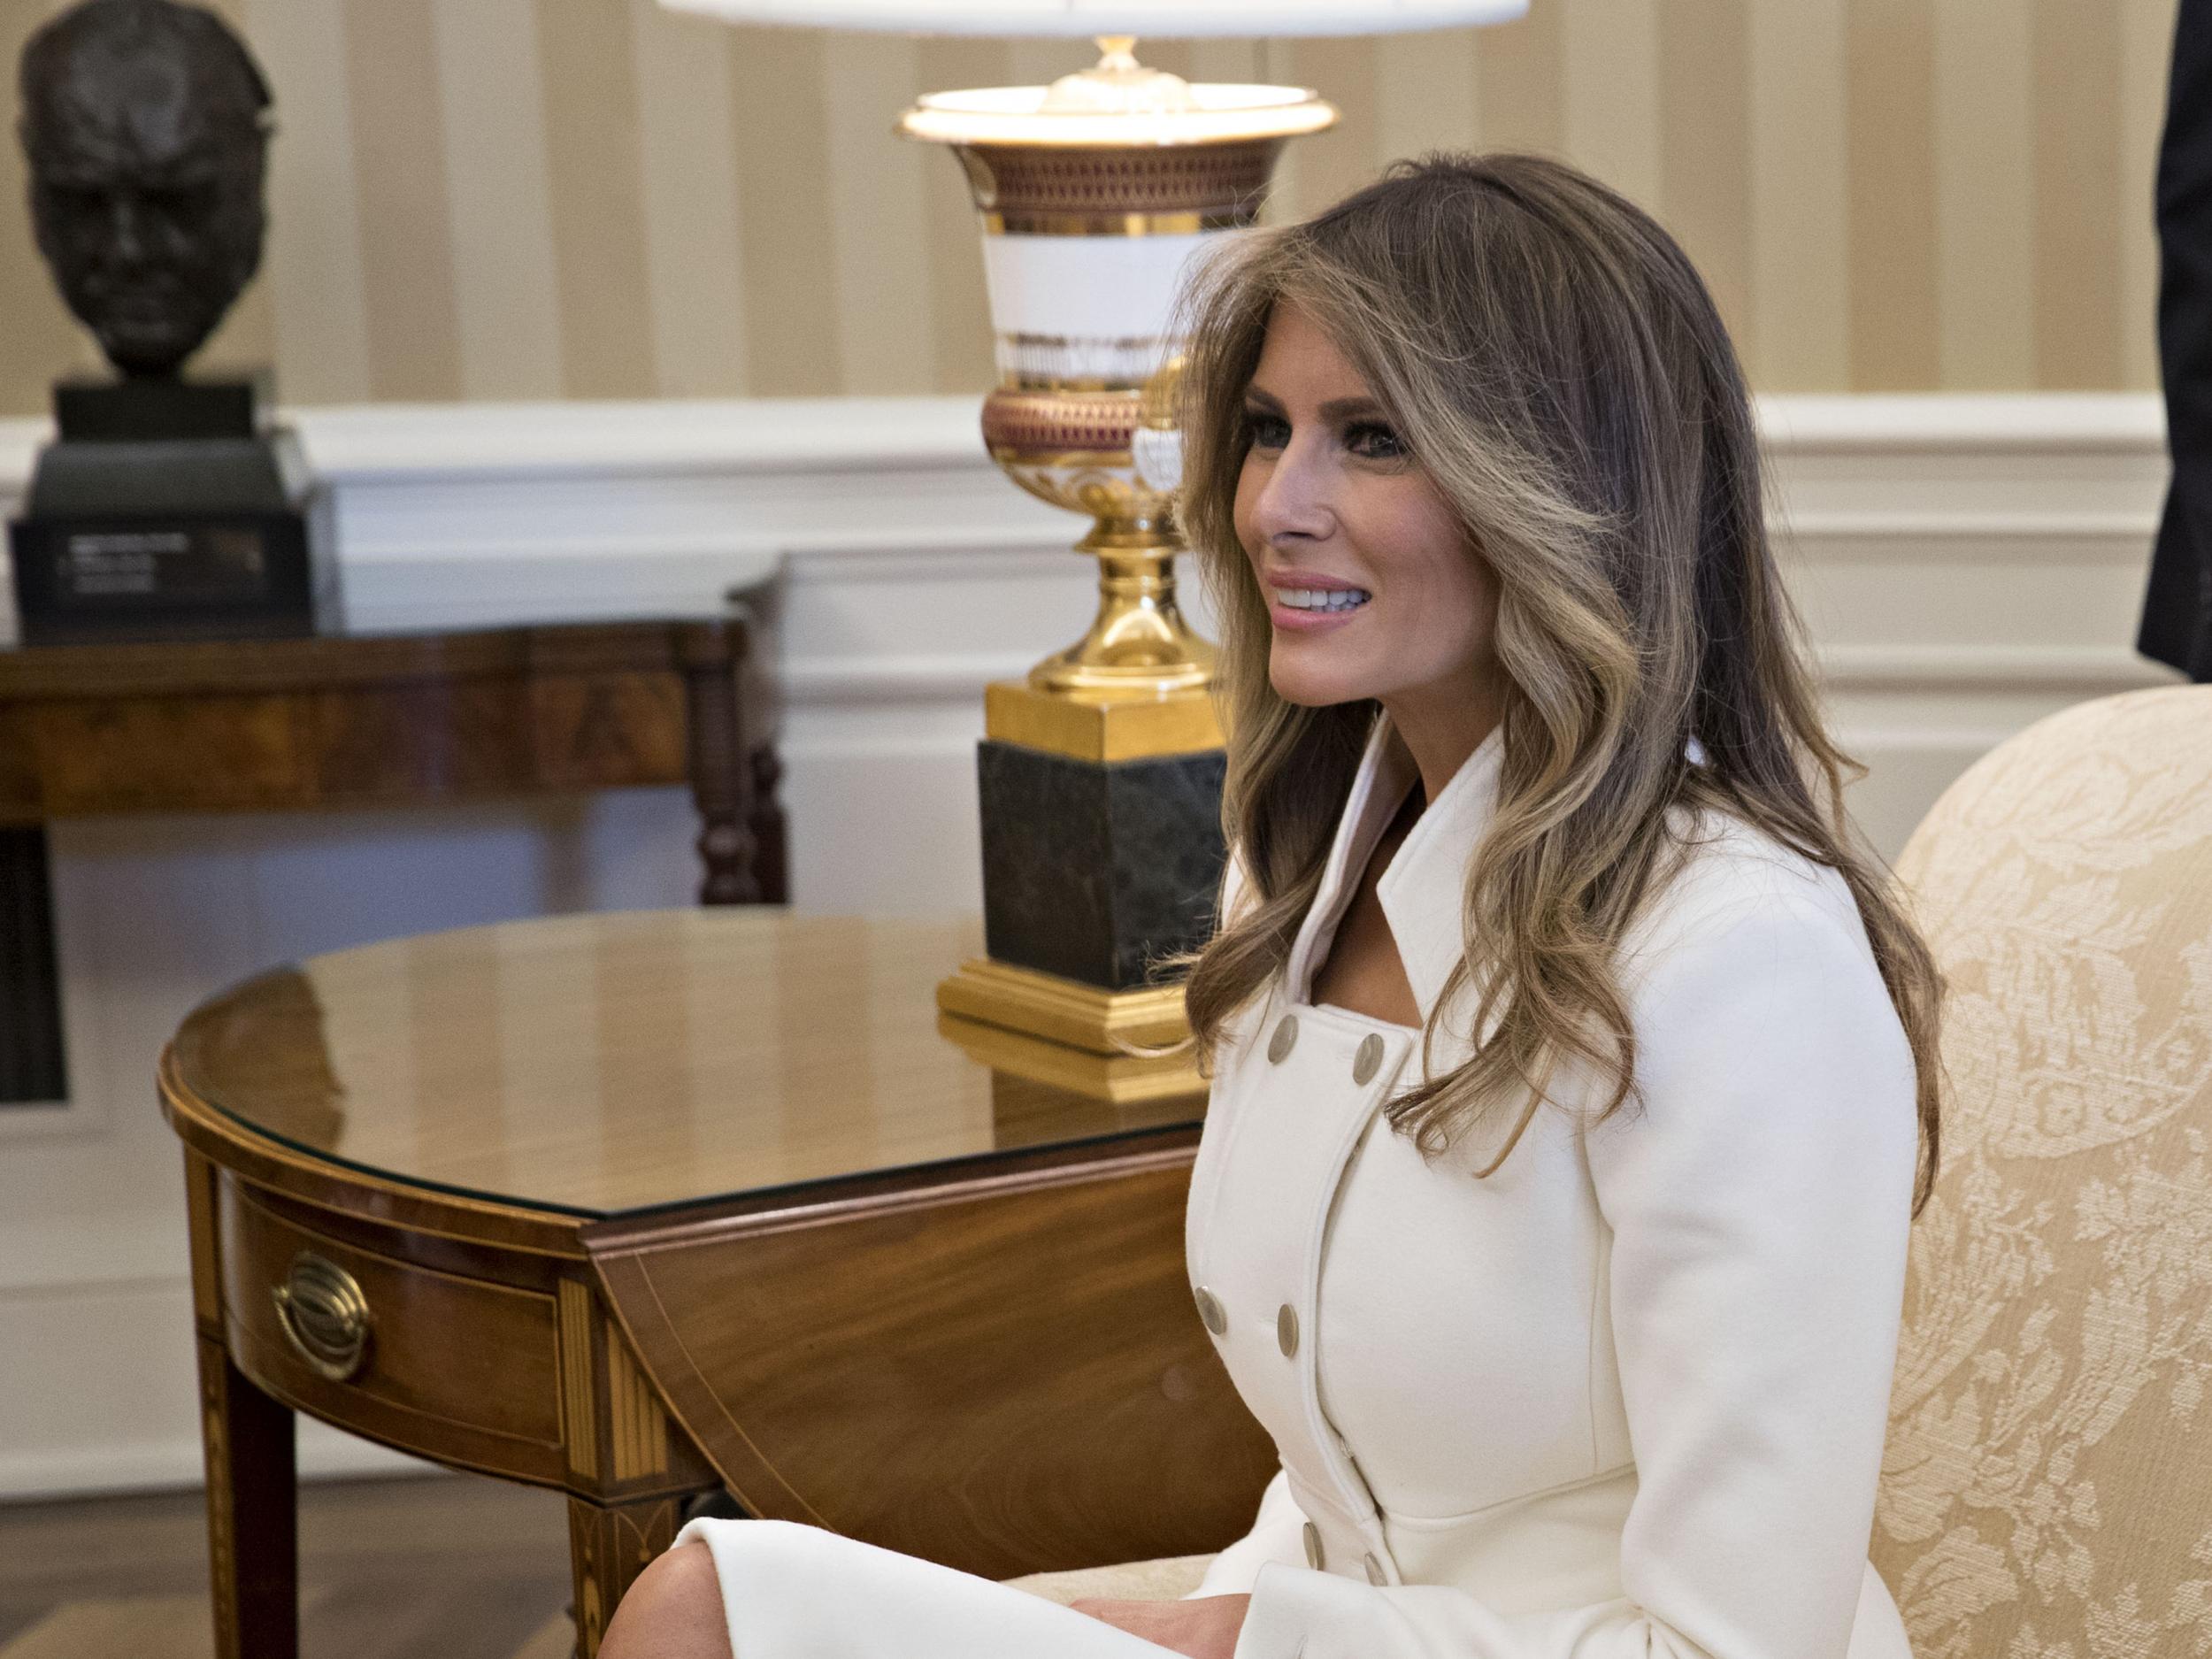 Former model remained largely absent from public appearances in the first three weeks of her husband’s presidency, triggering speculation about her willingness to carry out the duties expected of a first lady